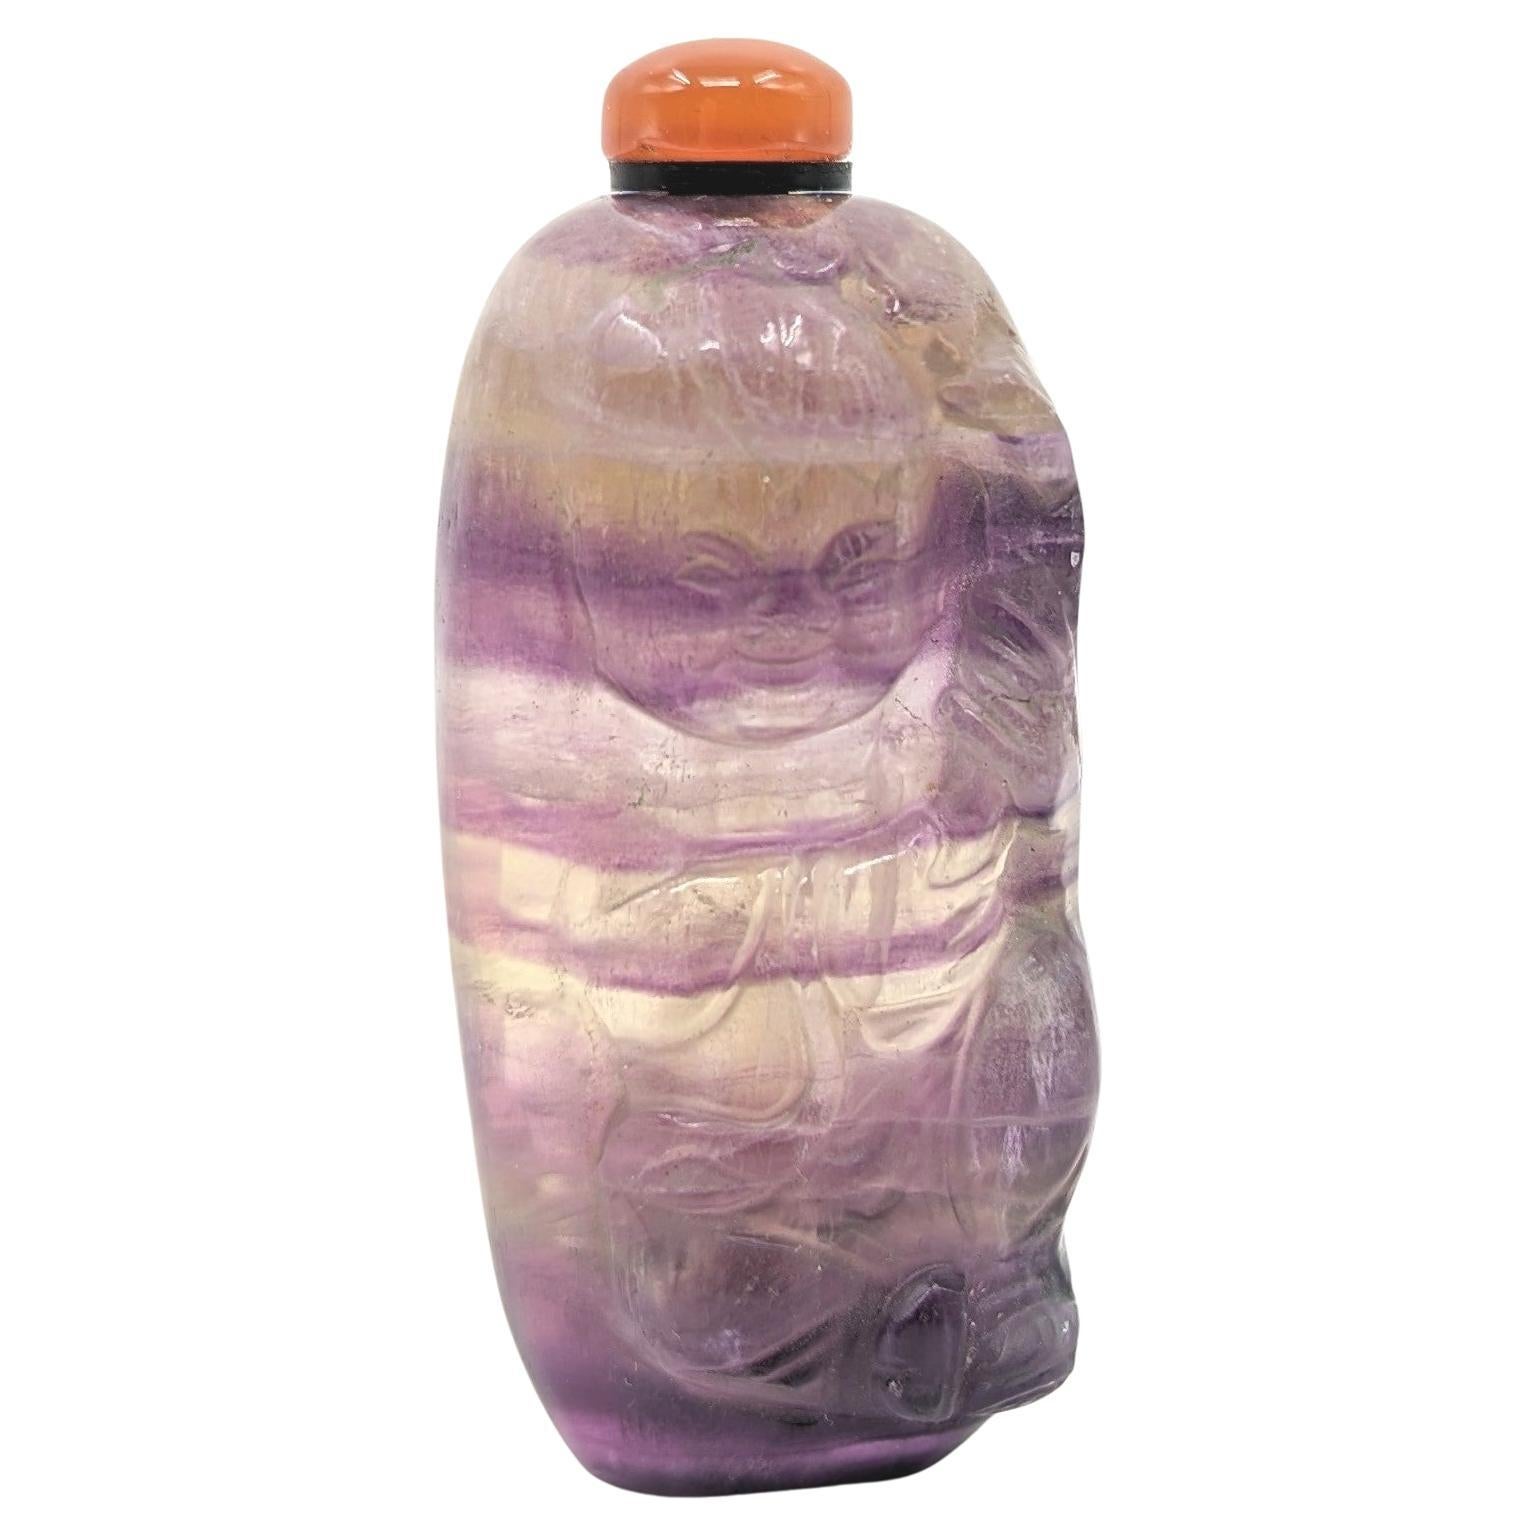 An antique banded amethyst quartz snuff bottle, well carved in the figure of a child holding a lotus leaf. The beautiful quartz material displays vibrant purple bands of amethyst, on a flat foot ring, with an orange agate stopper

Height: